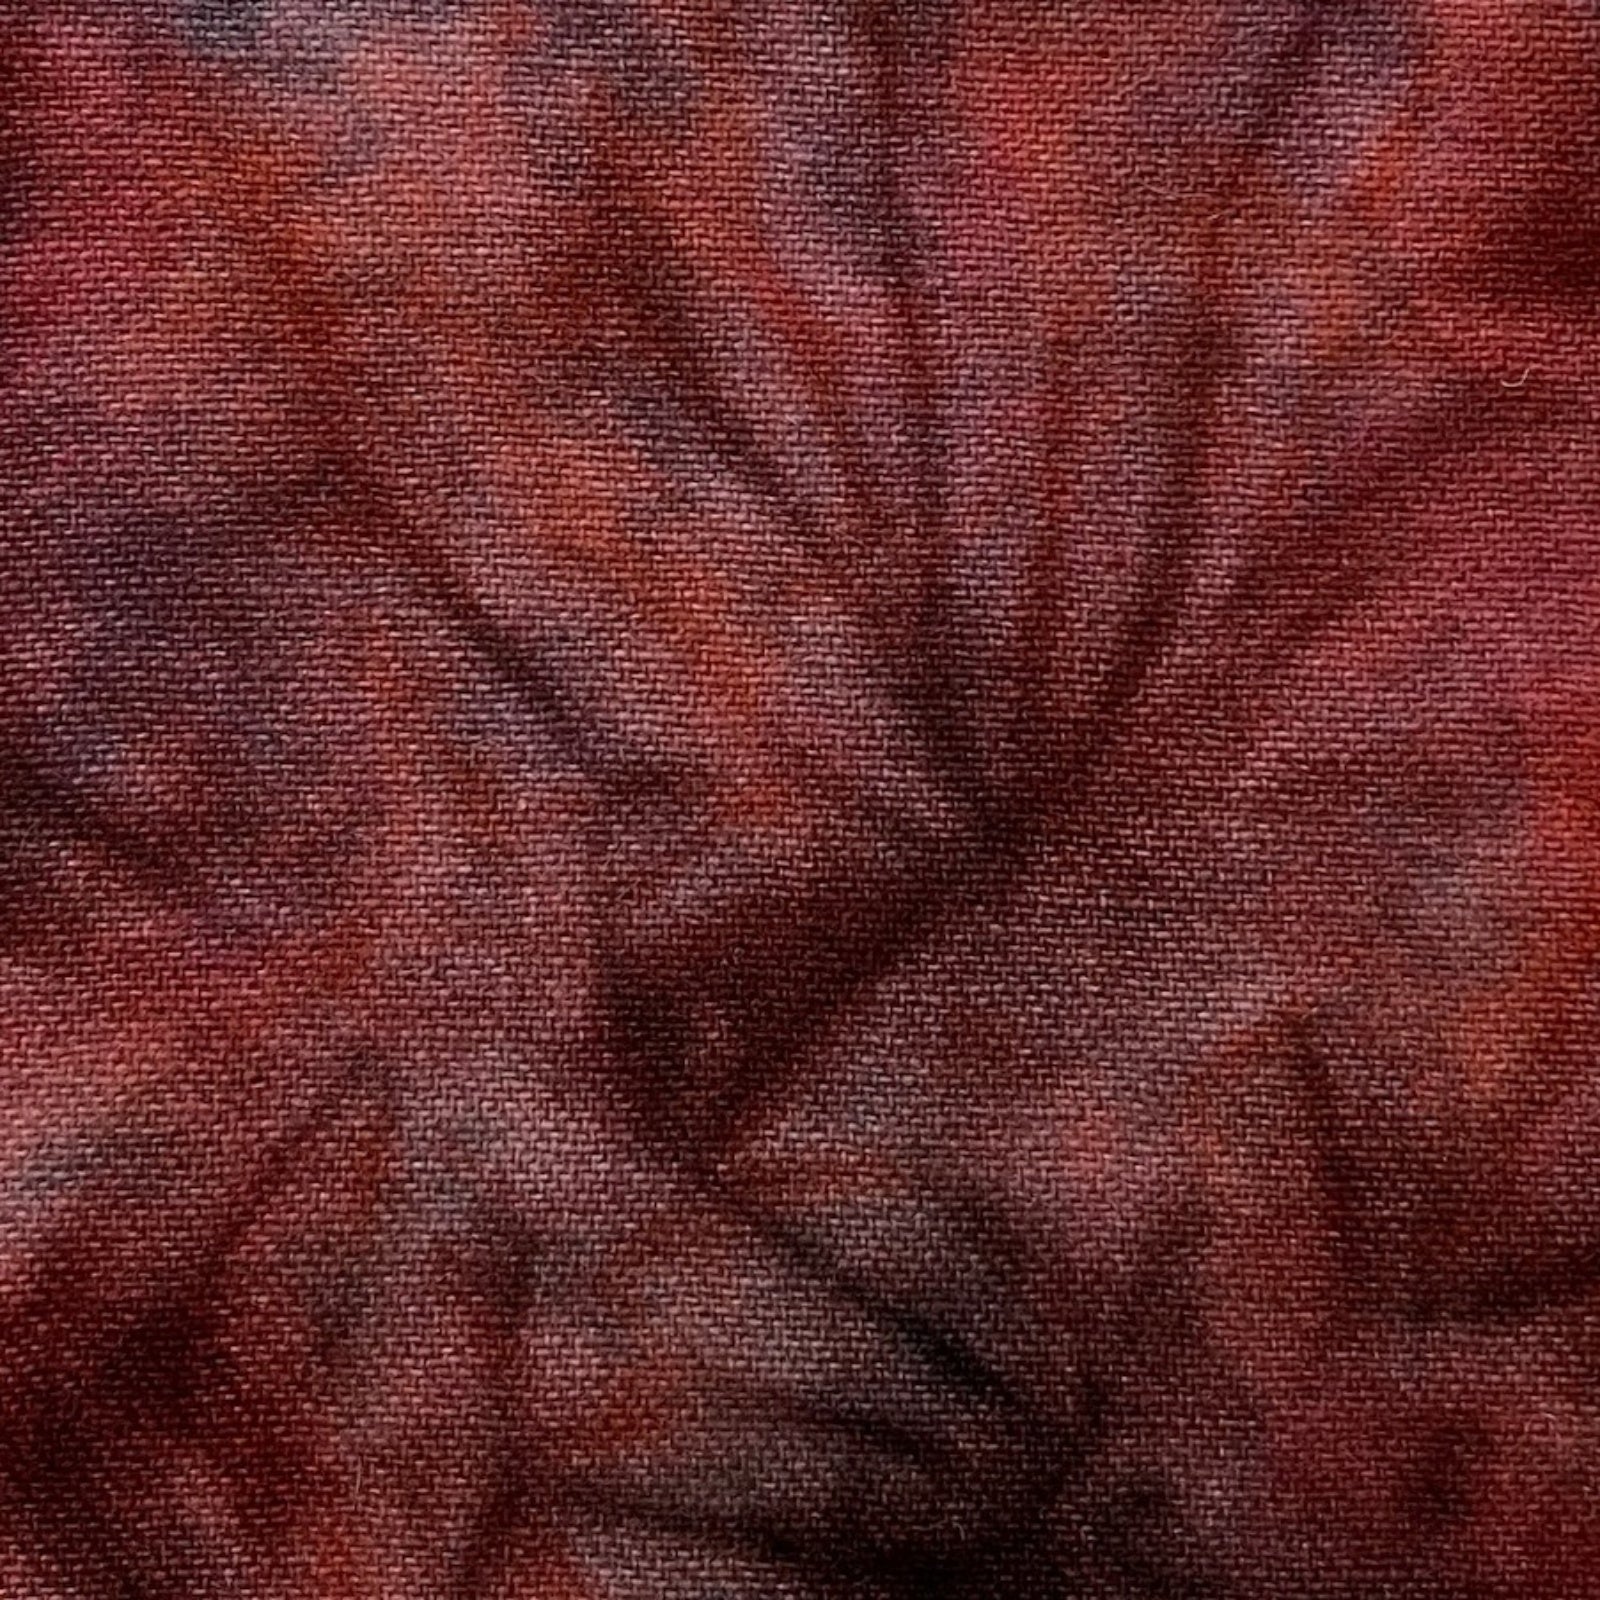 Juneberry - Colorama Hand Dyed Wool - Offered by HoneyBee Hive Rug Hooking